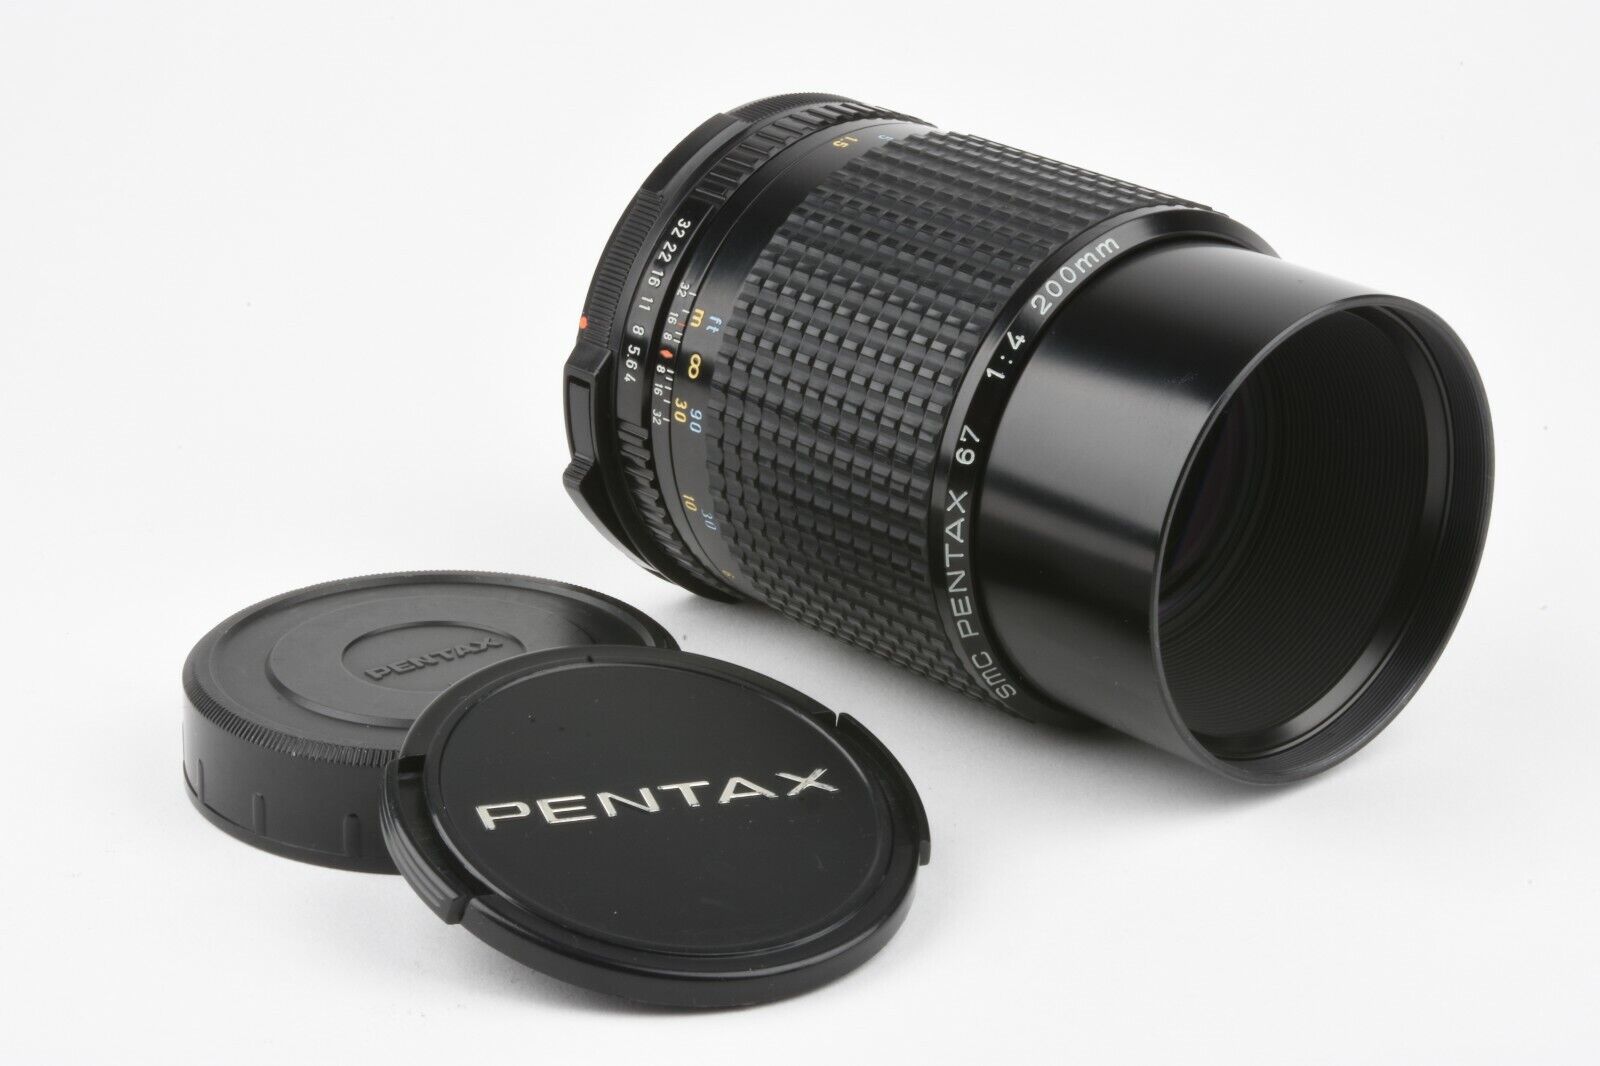 MINT- PENTAX 67 SMC 6x7 200mm f4 LENS +CAPS, BARELY USED, VERY CLEAN &  SHARP!